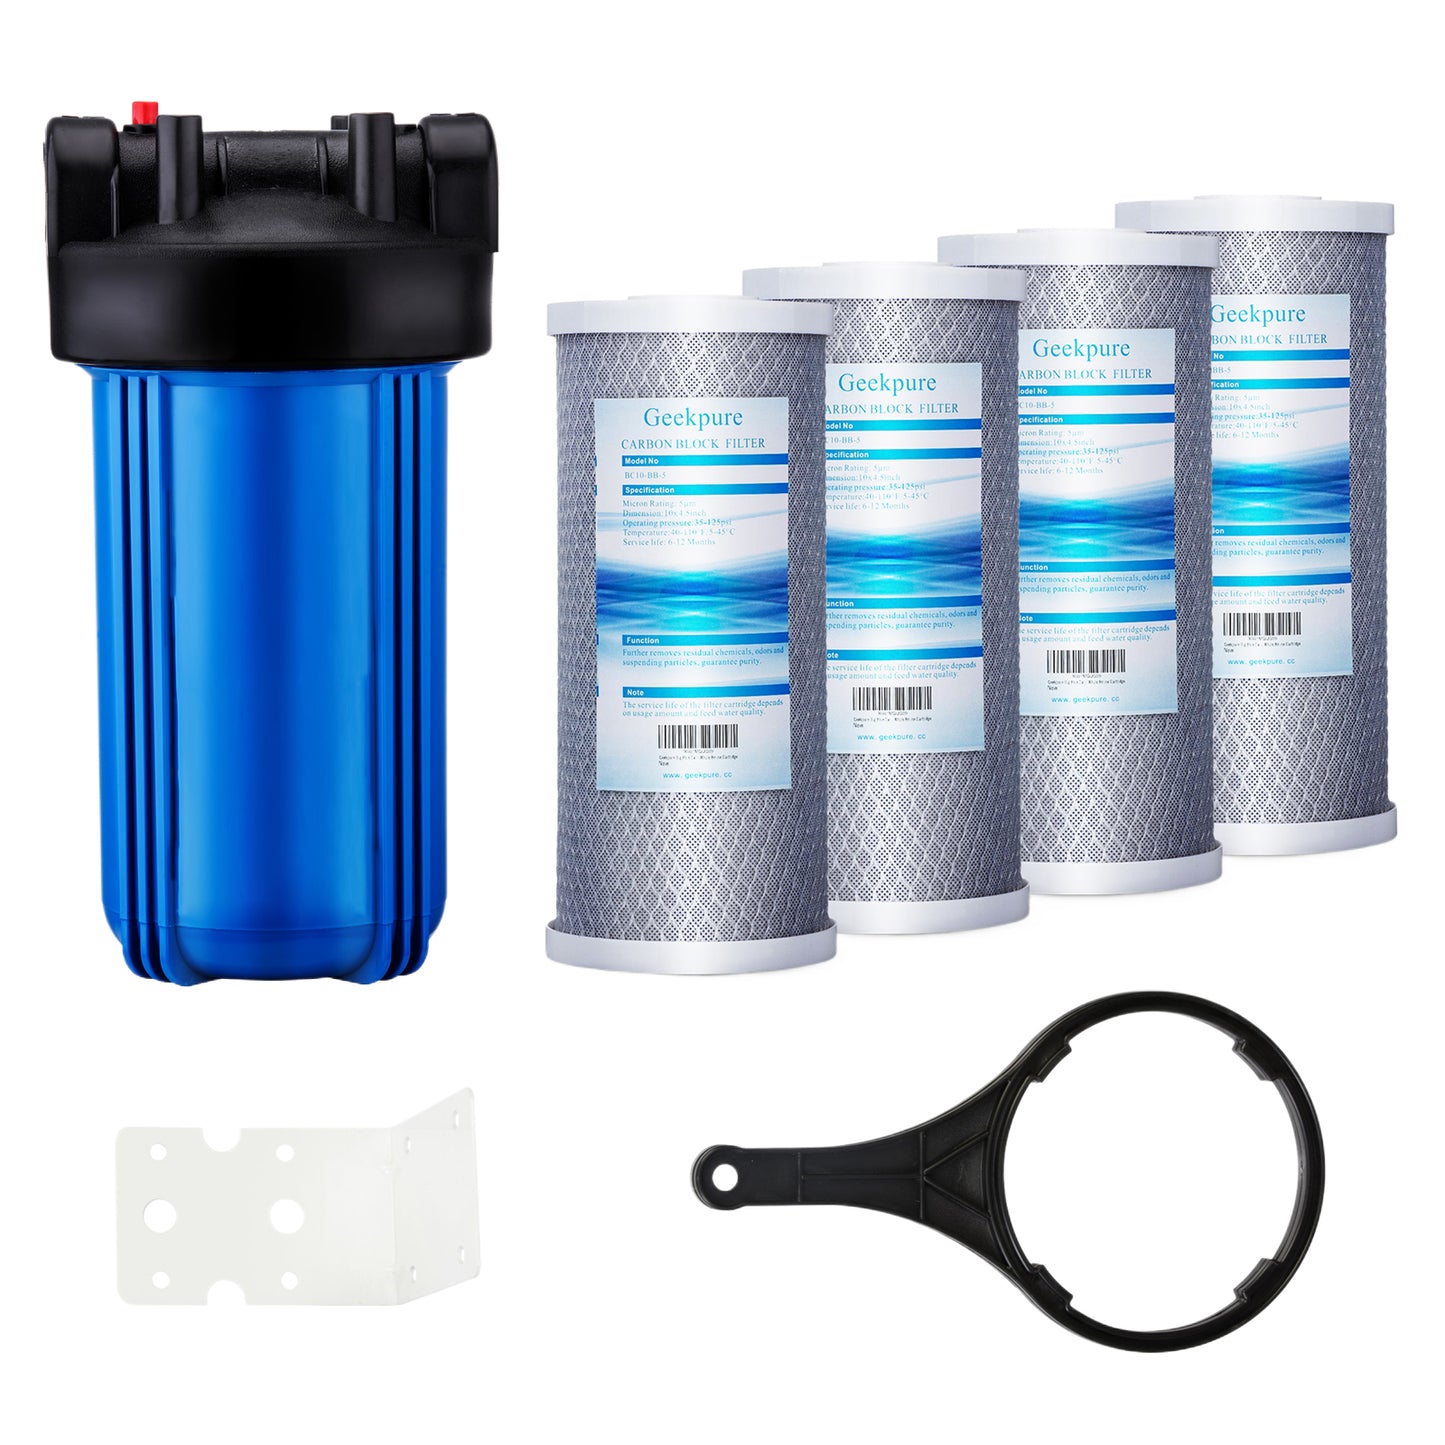 Geekpure 10-Inch Whole House Water Filter System with 4 Carbon Block Filters-4.5"x10"-3/4 Inch Port